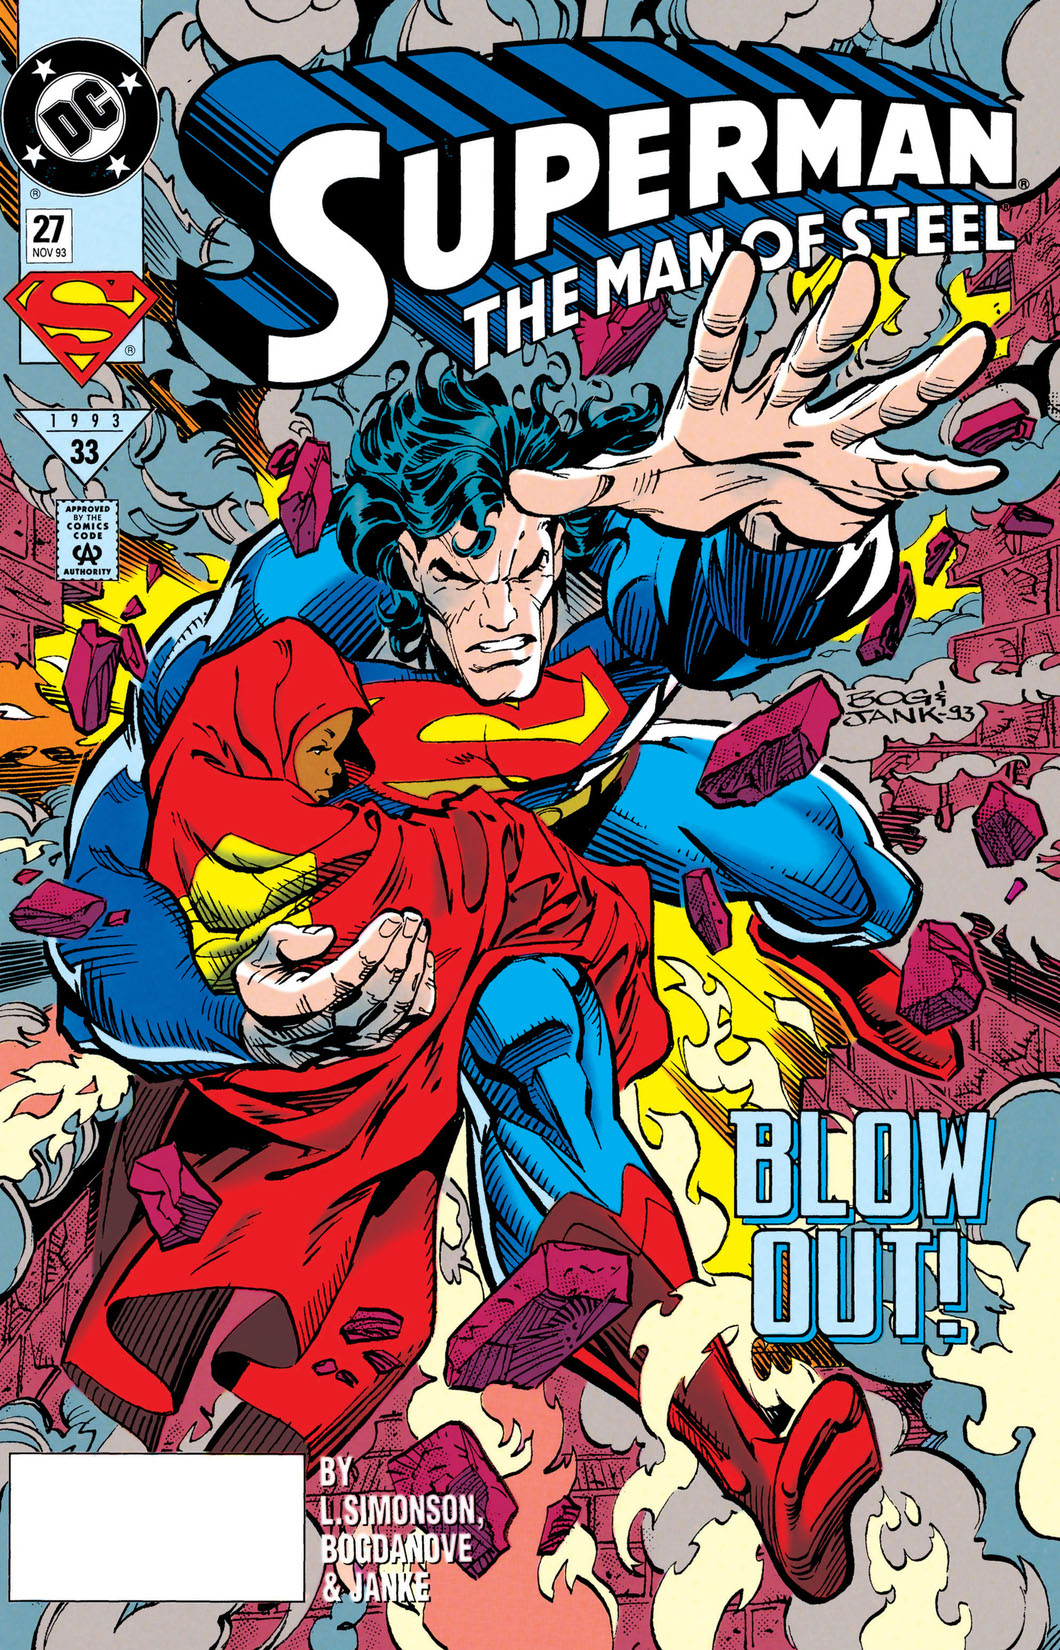 Superman: The Man of Steel #27 preview images